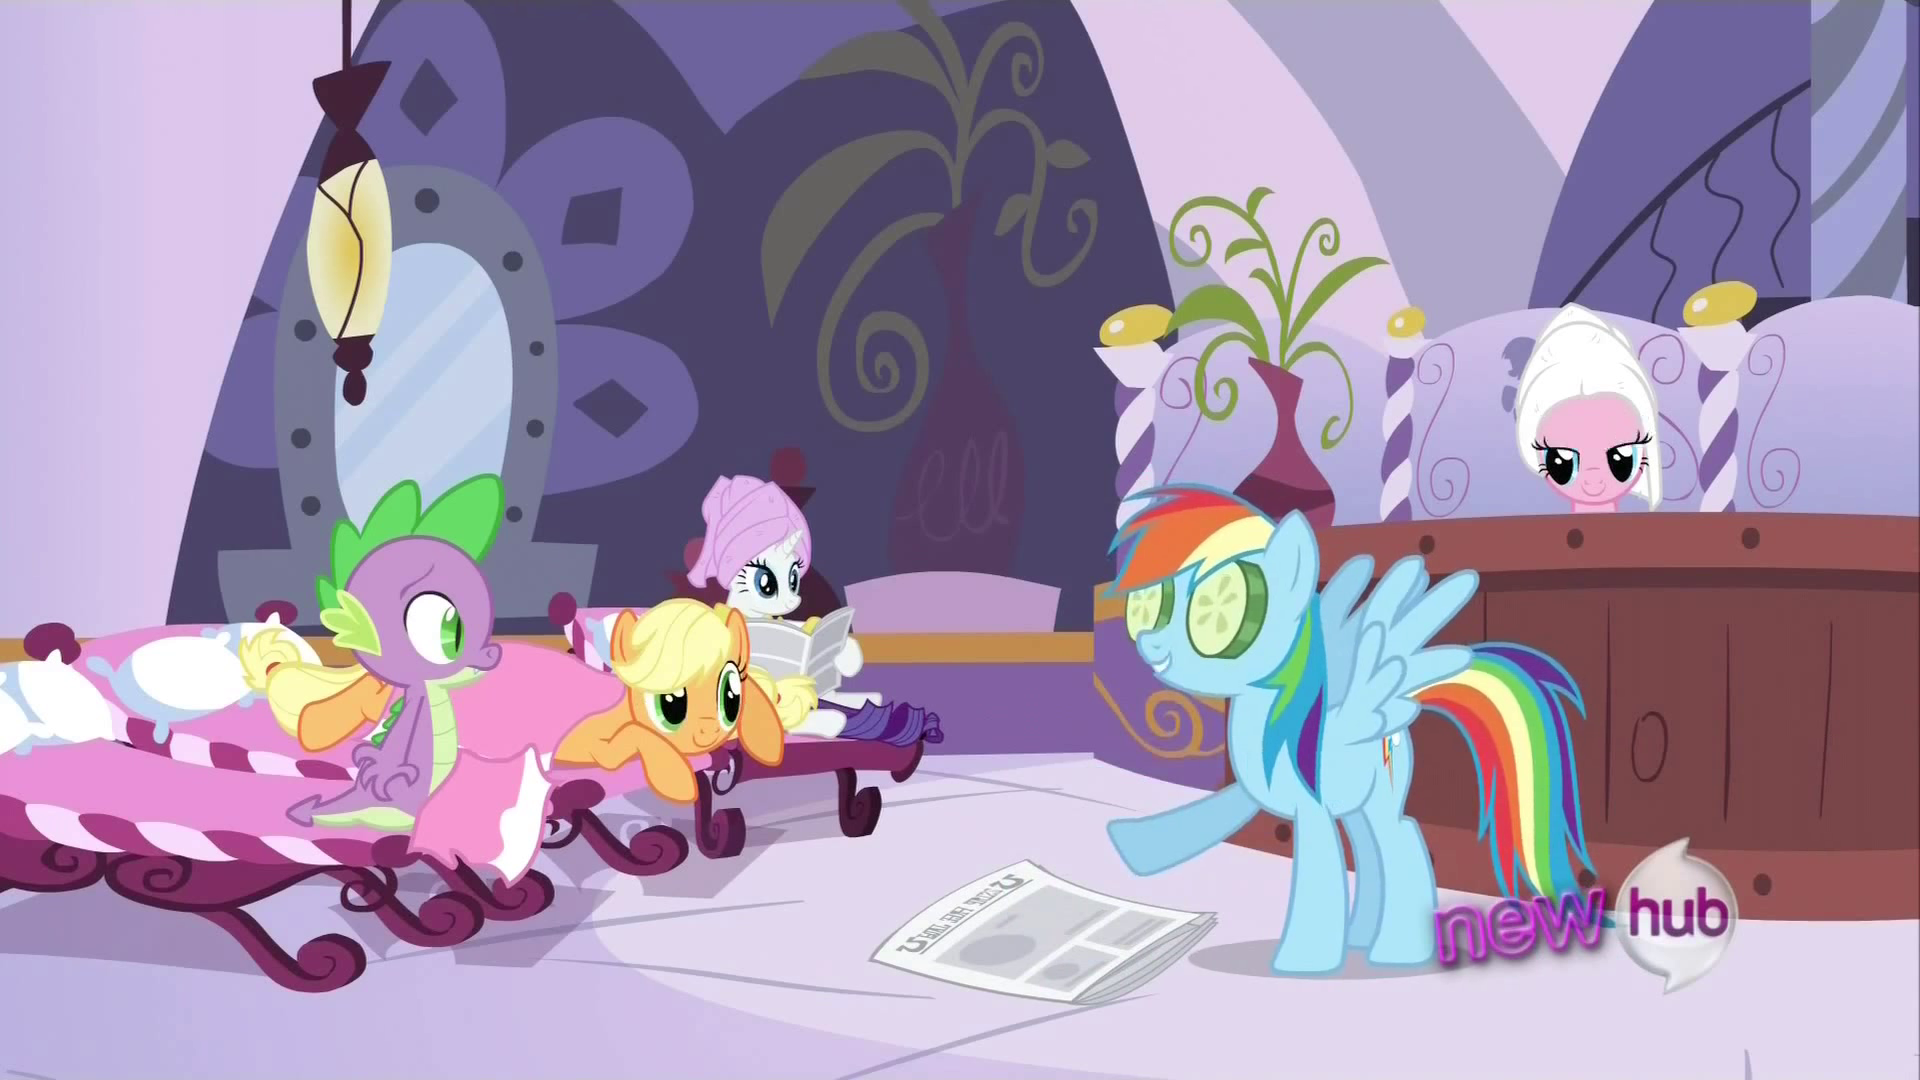 http://img4.wikia.nocookie.net/__cb20120331213247/mlp/images/3/35/Rainbow_Dash_latest_news_S2E23.png